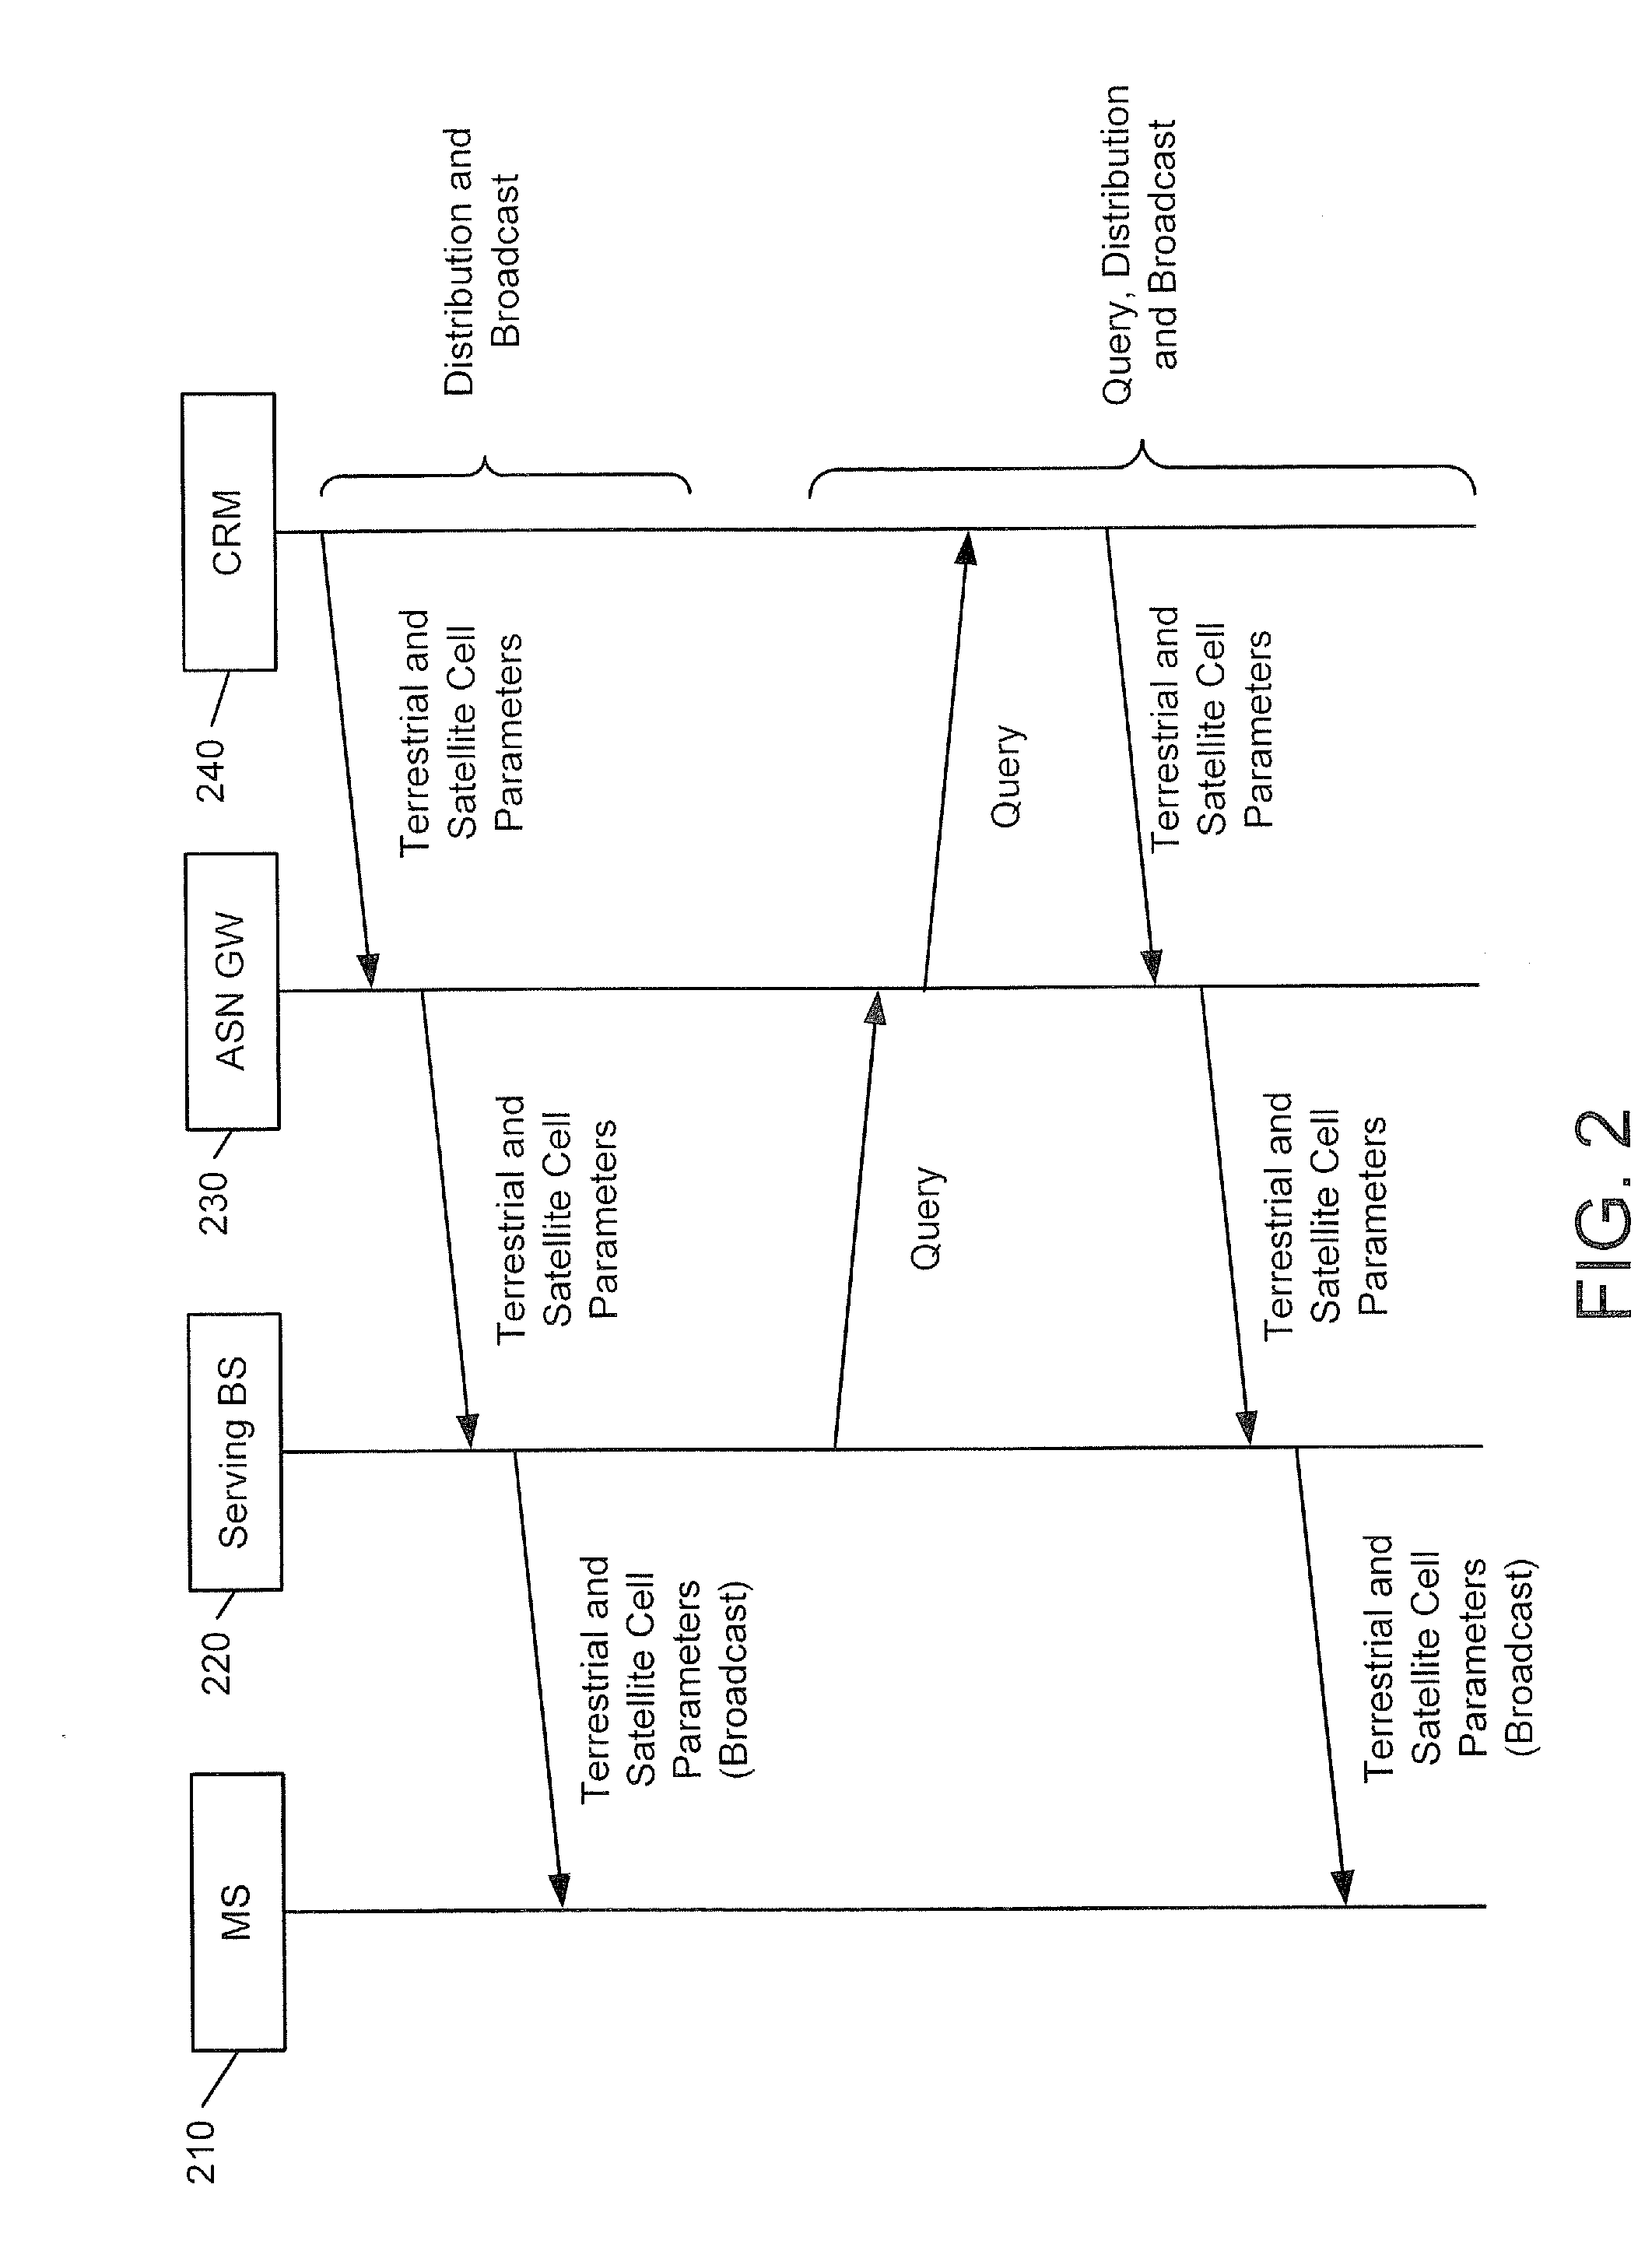 Apparatus and Methods for Mobility Management in Hybrid Terrestrial-Satellite Mobile Communications Systems